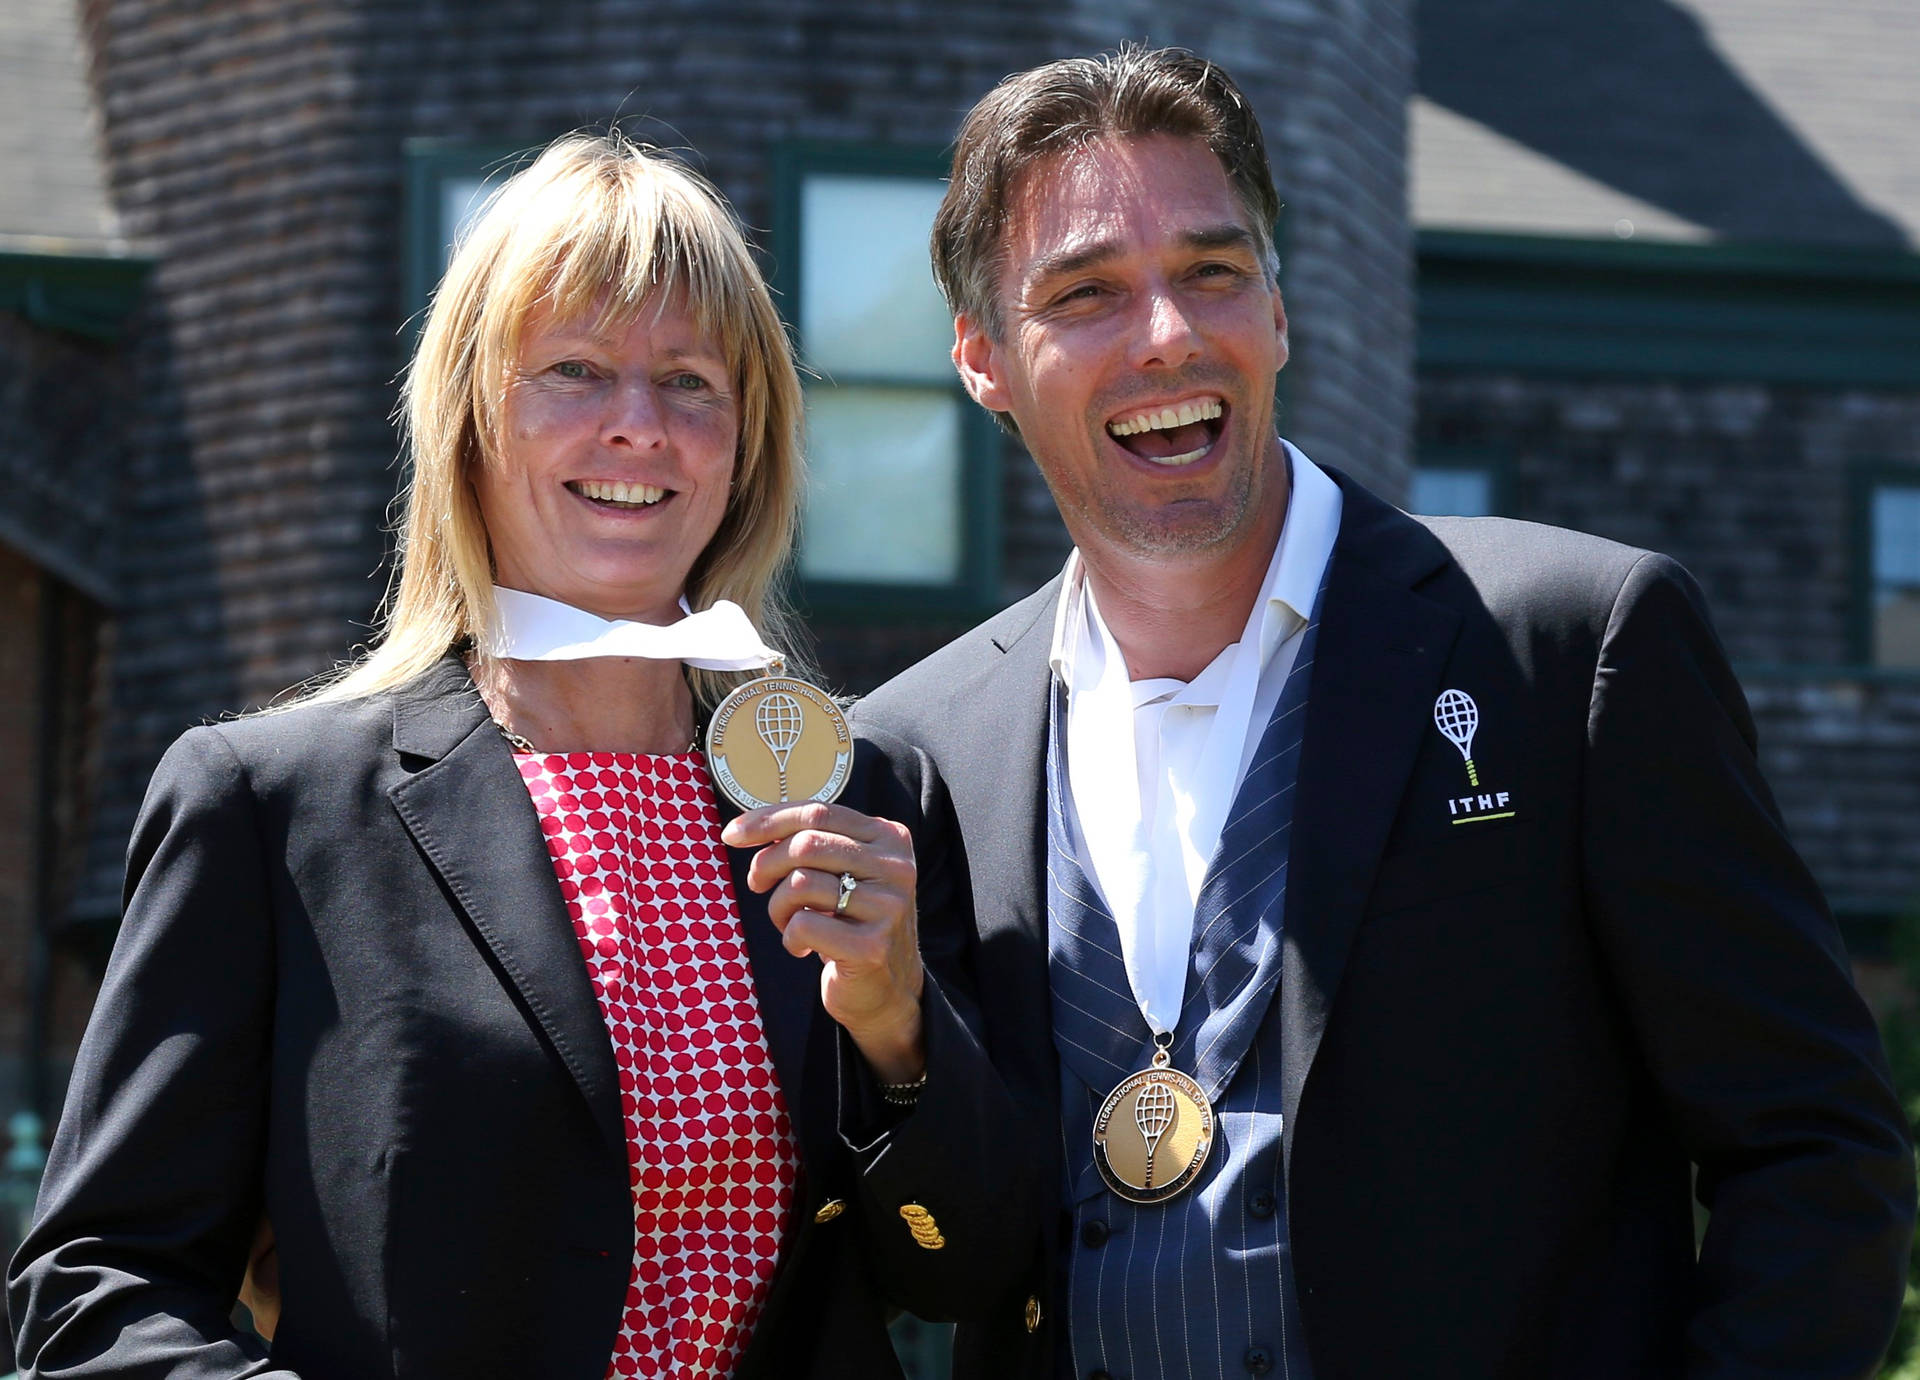 Helena Sukova and Michael Stich proudly displaying their medals Wallpaper